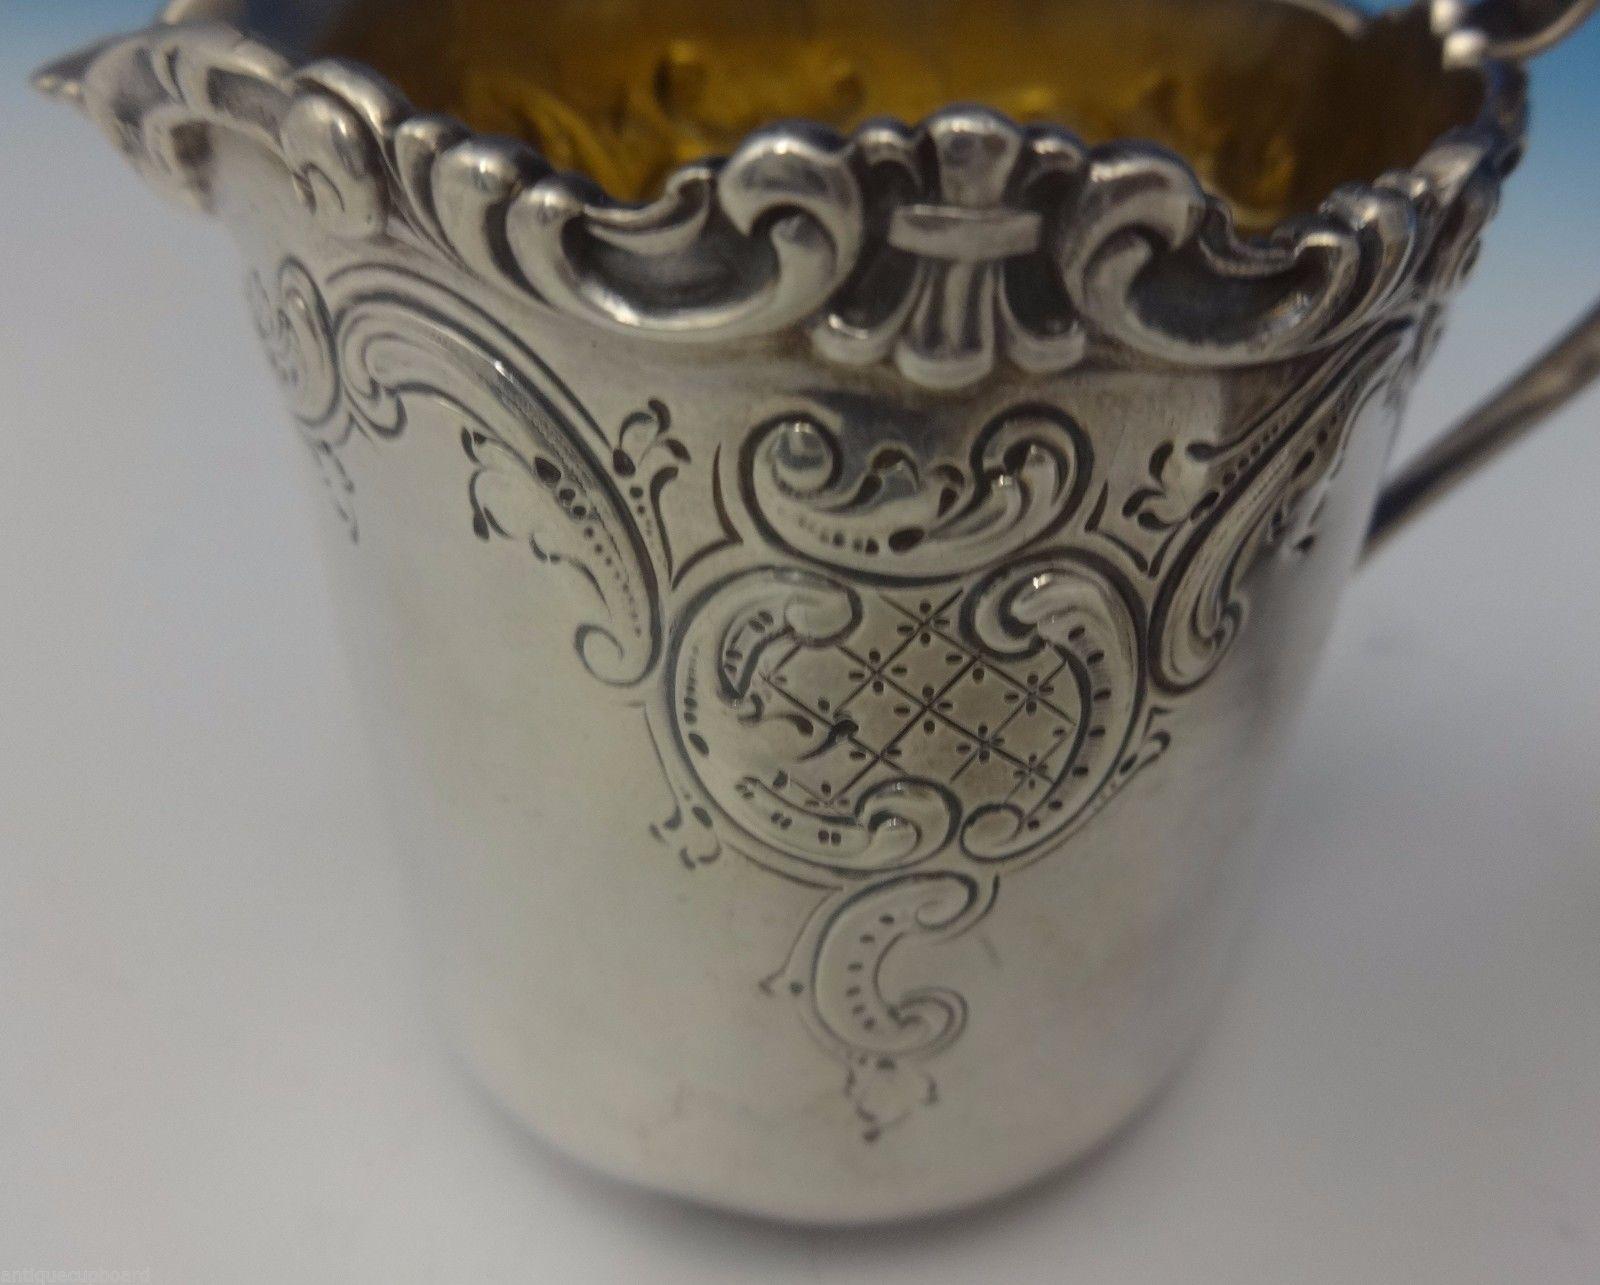 Dominick and Haff
This sterling silver sugar bowl and creamer 2-piece set was made by Dominick and Haff in 1891. The design features repoussed scrollwork with hand engraved detail. The pieces are marked #522 and were retailed by the store Spaulding